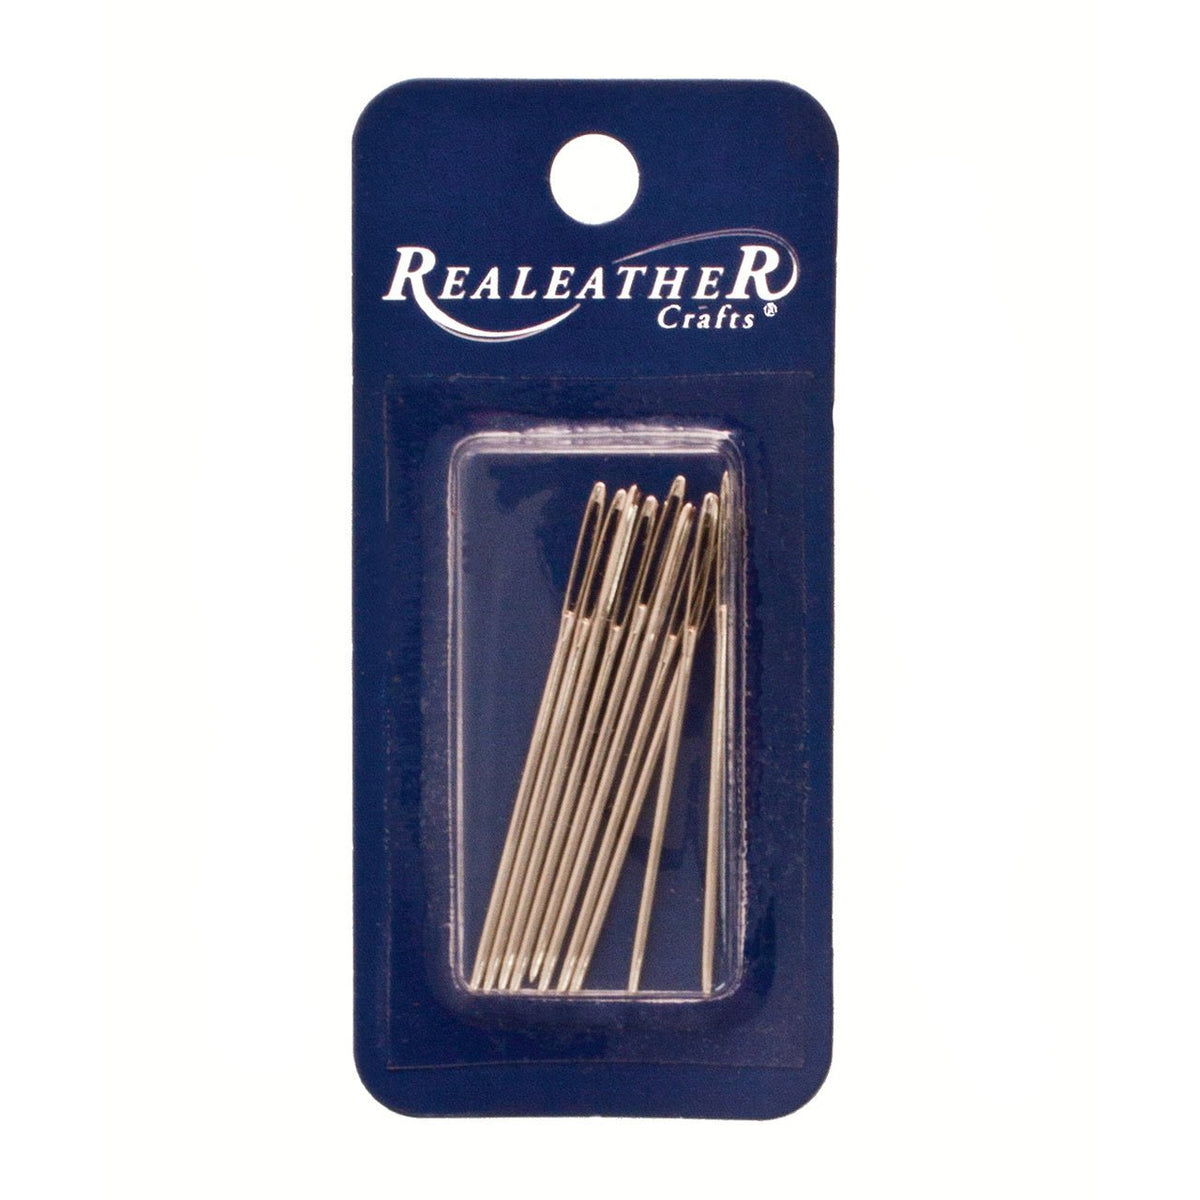 Leather Stitching Needles - 10 Pack - merriartist.com